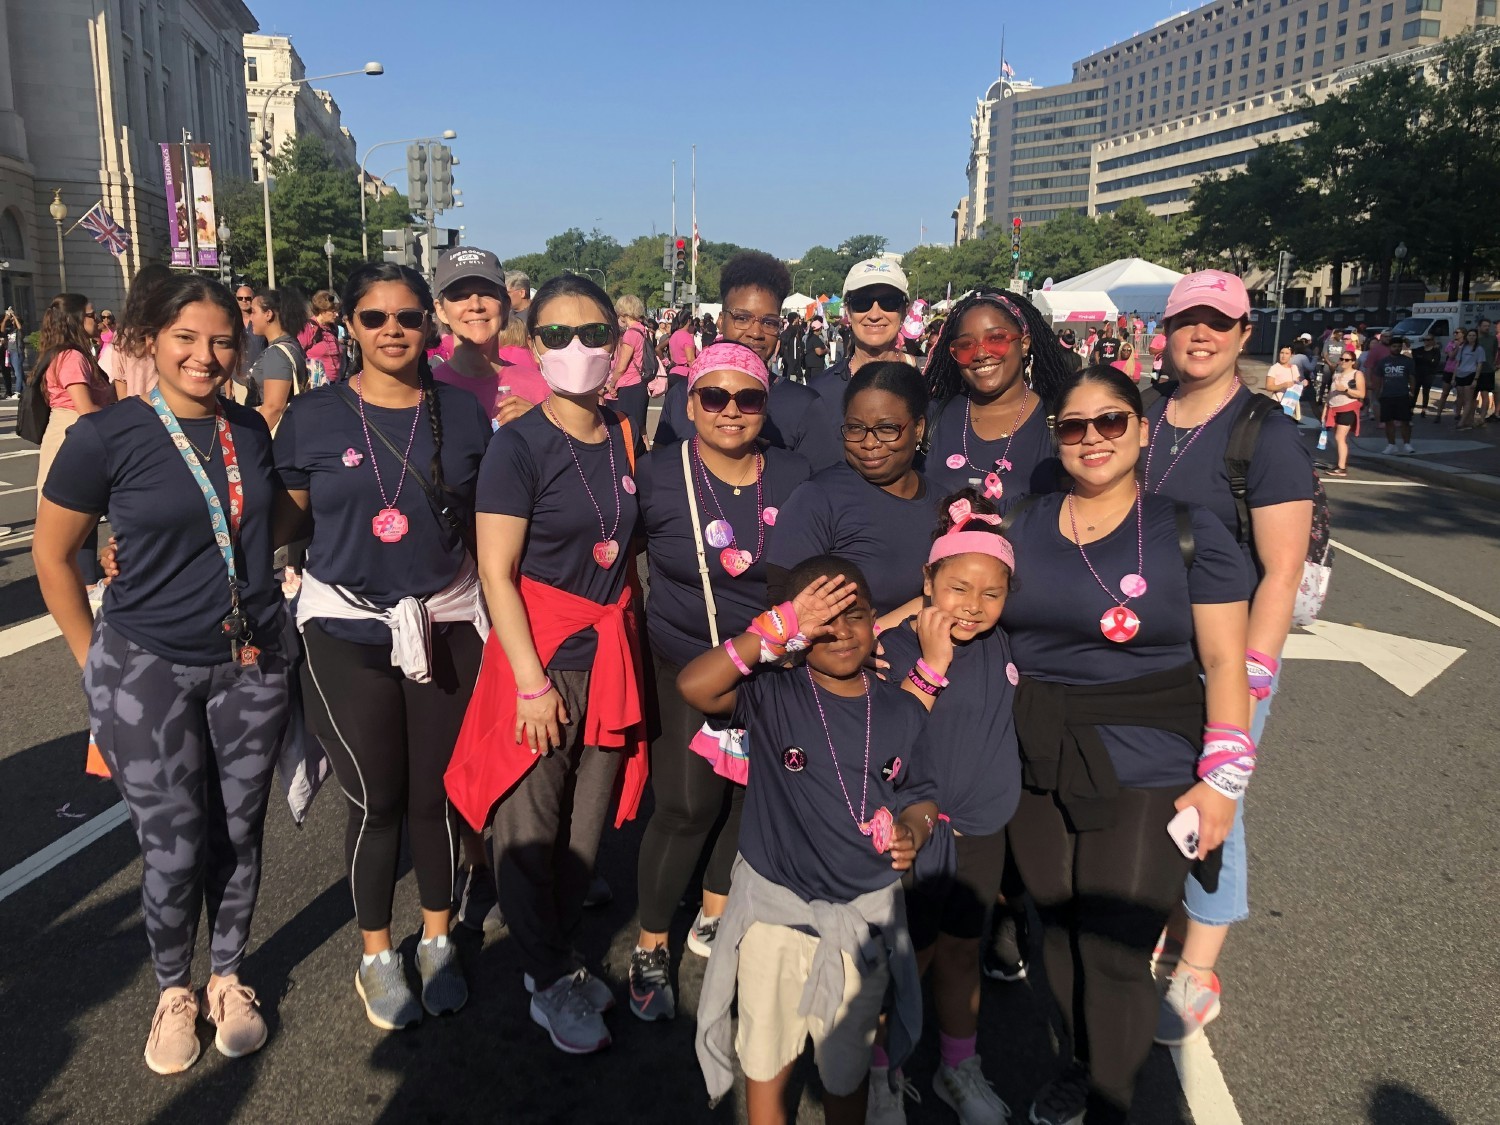 Team members from Washington Radiology participating in the Susan G. Komen fundraiser for breast cancer awareness.